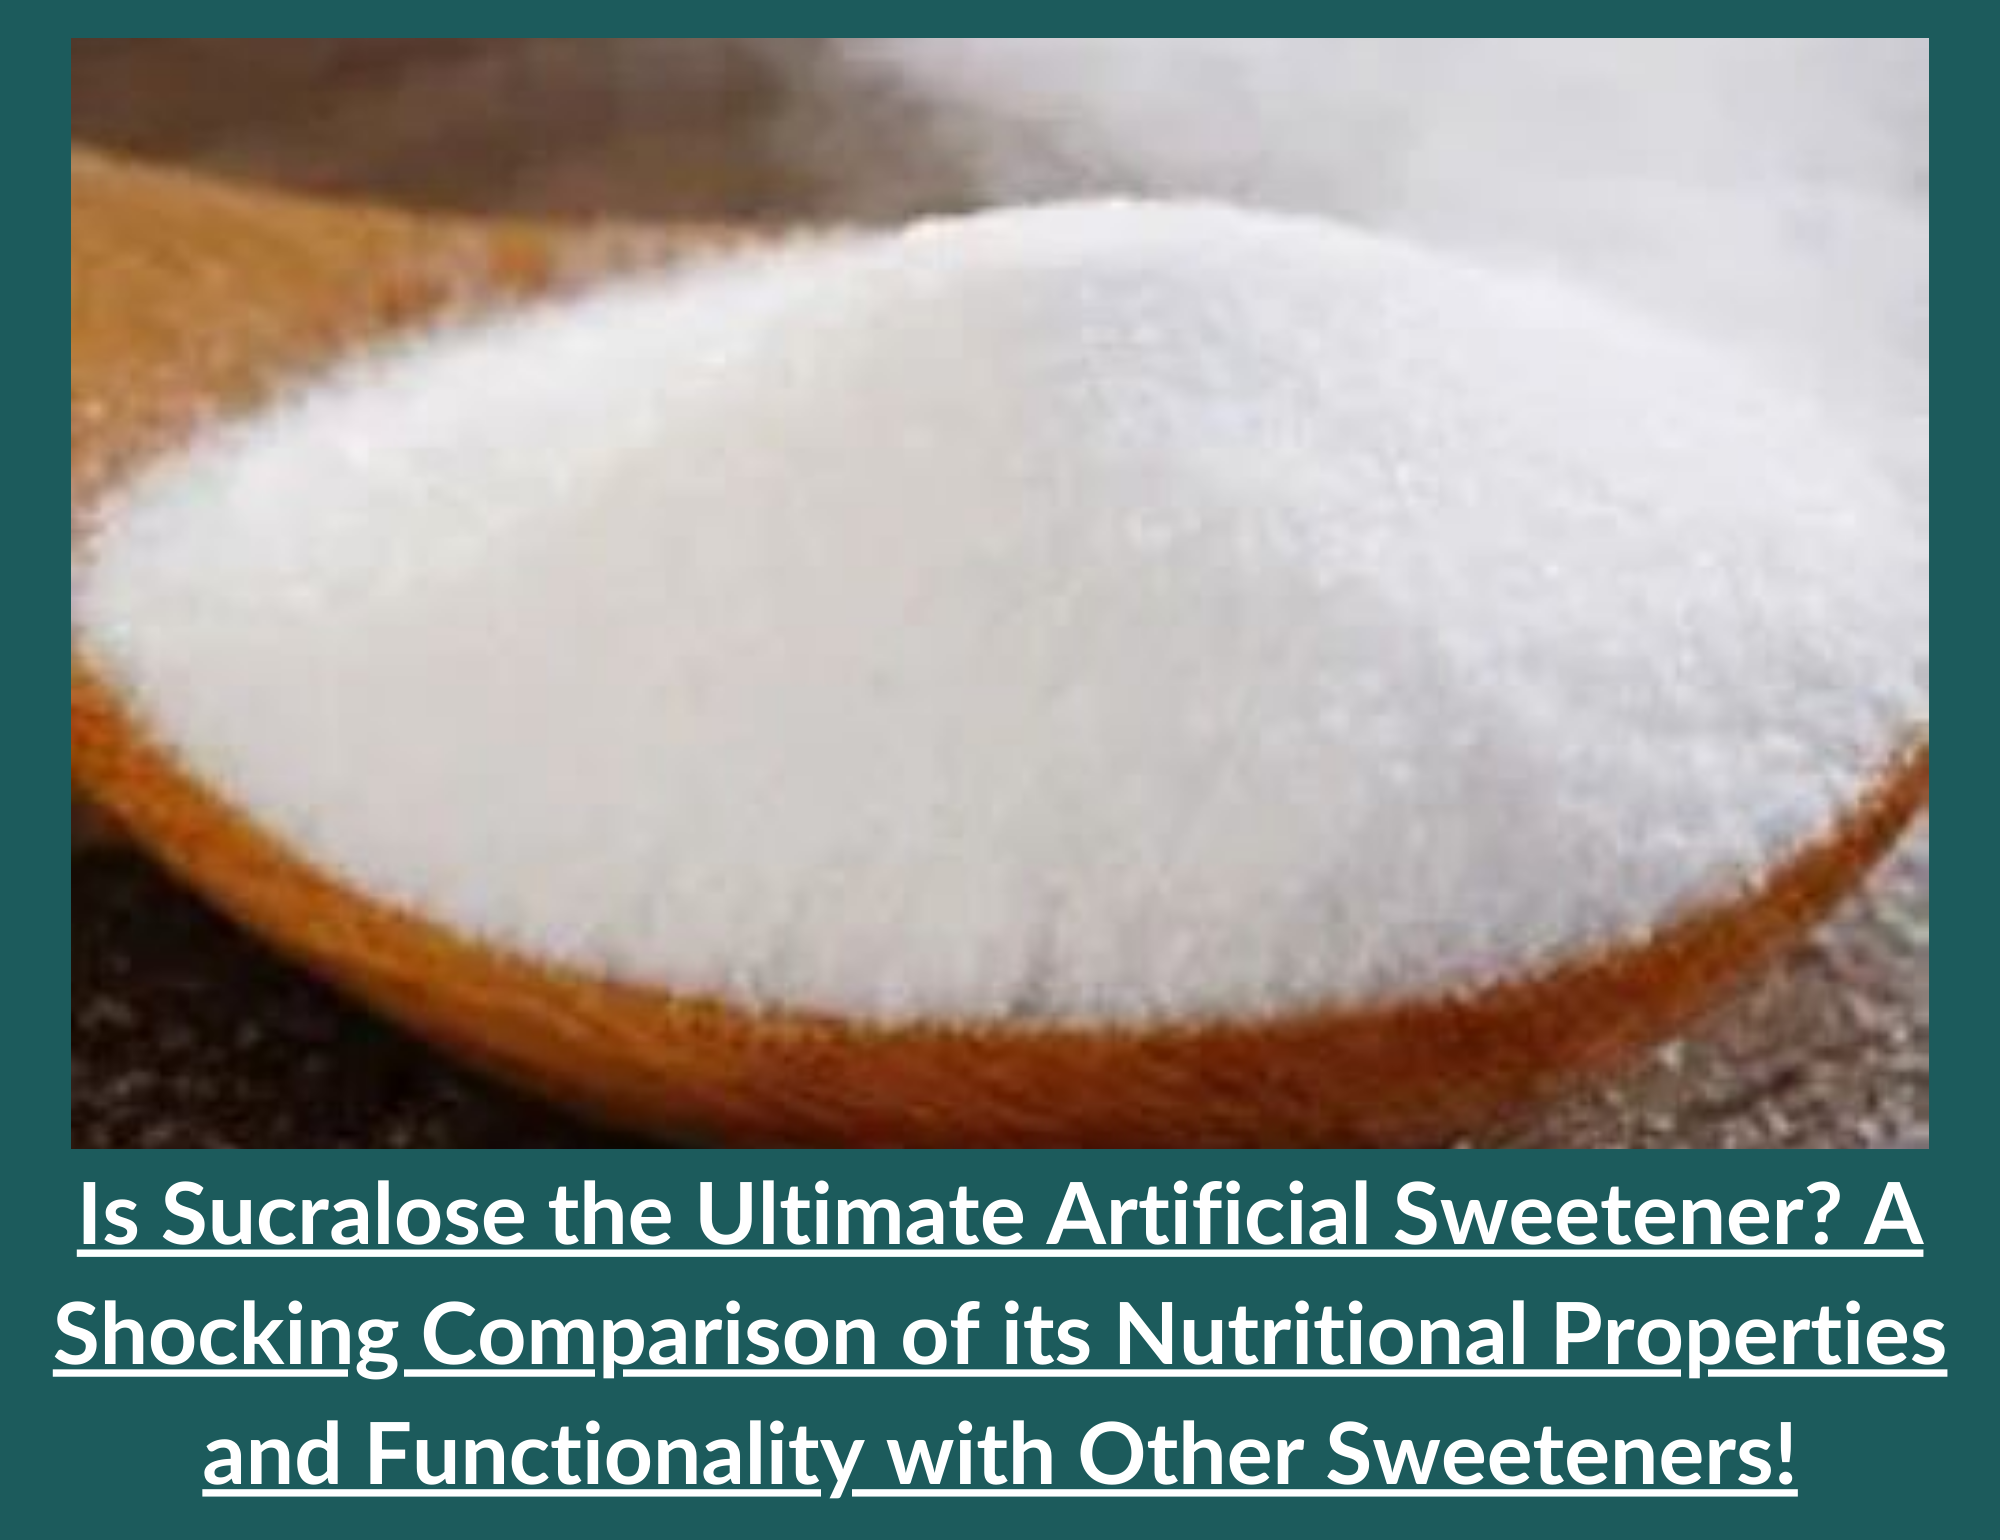 Comparison of Nutritional Properties and Functionality of Sucralose with Other Sweeteners!